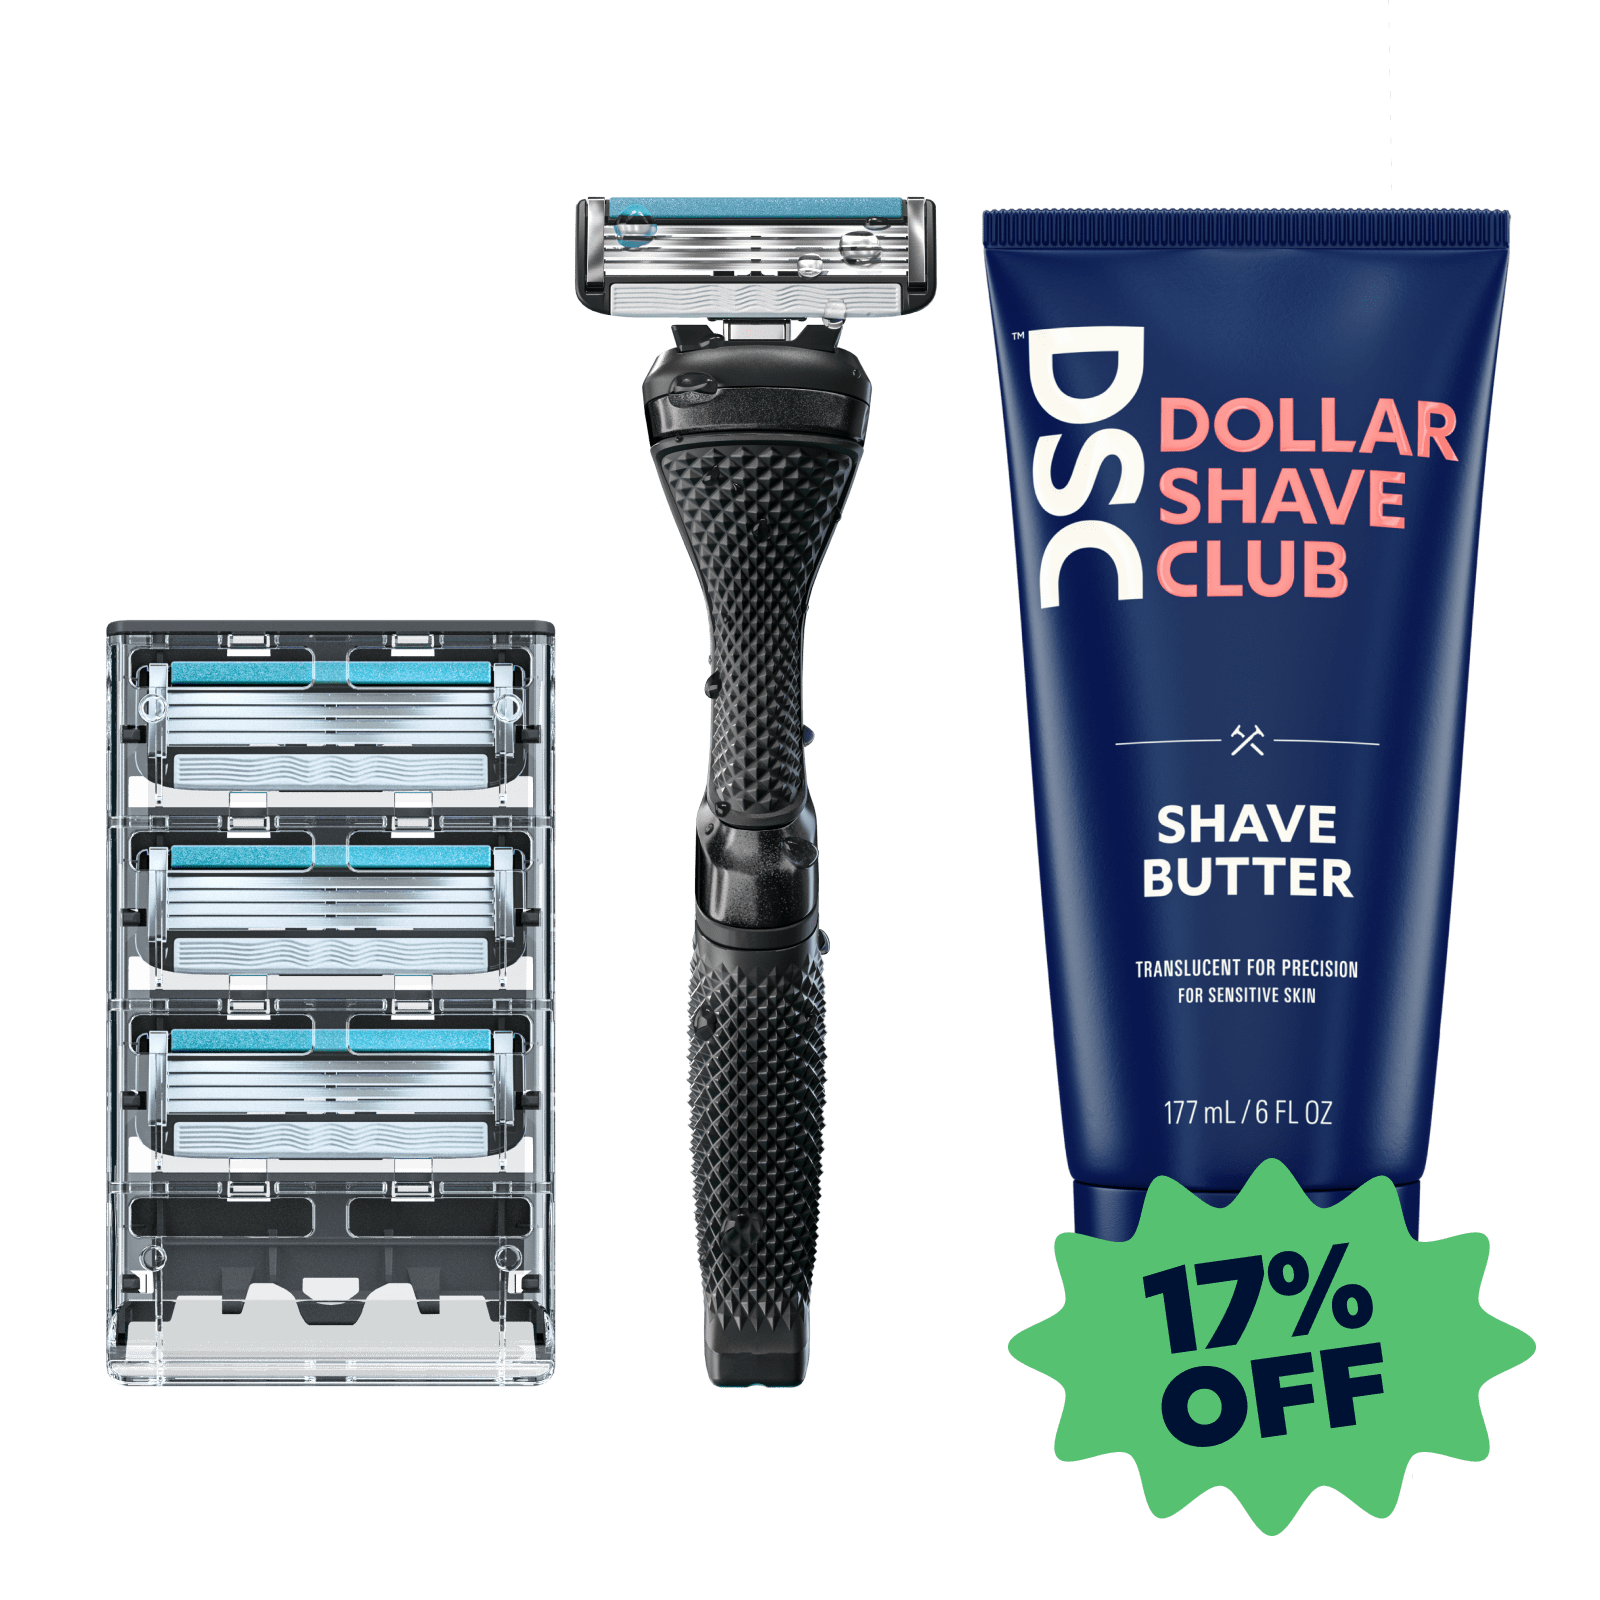 Dollar Shave Club Buttery Starter Kit 4 Blade Image Featuring All Products on Tan Backdrop.